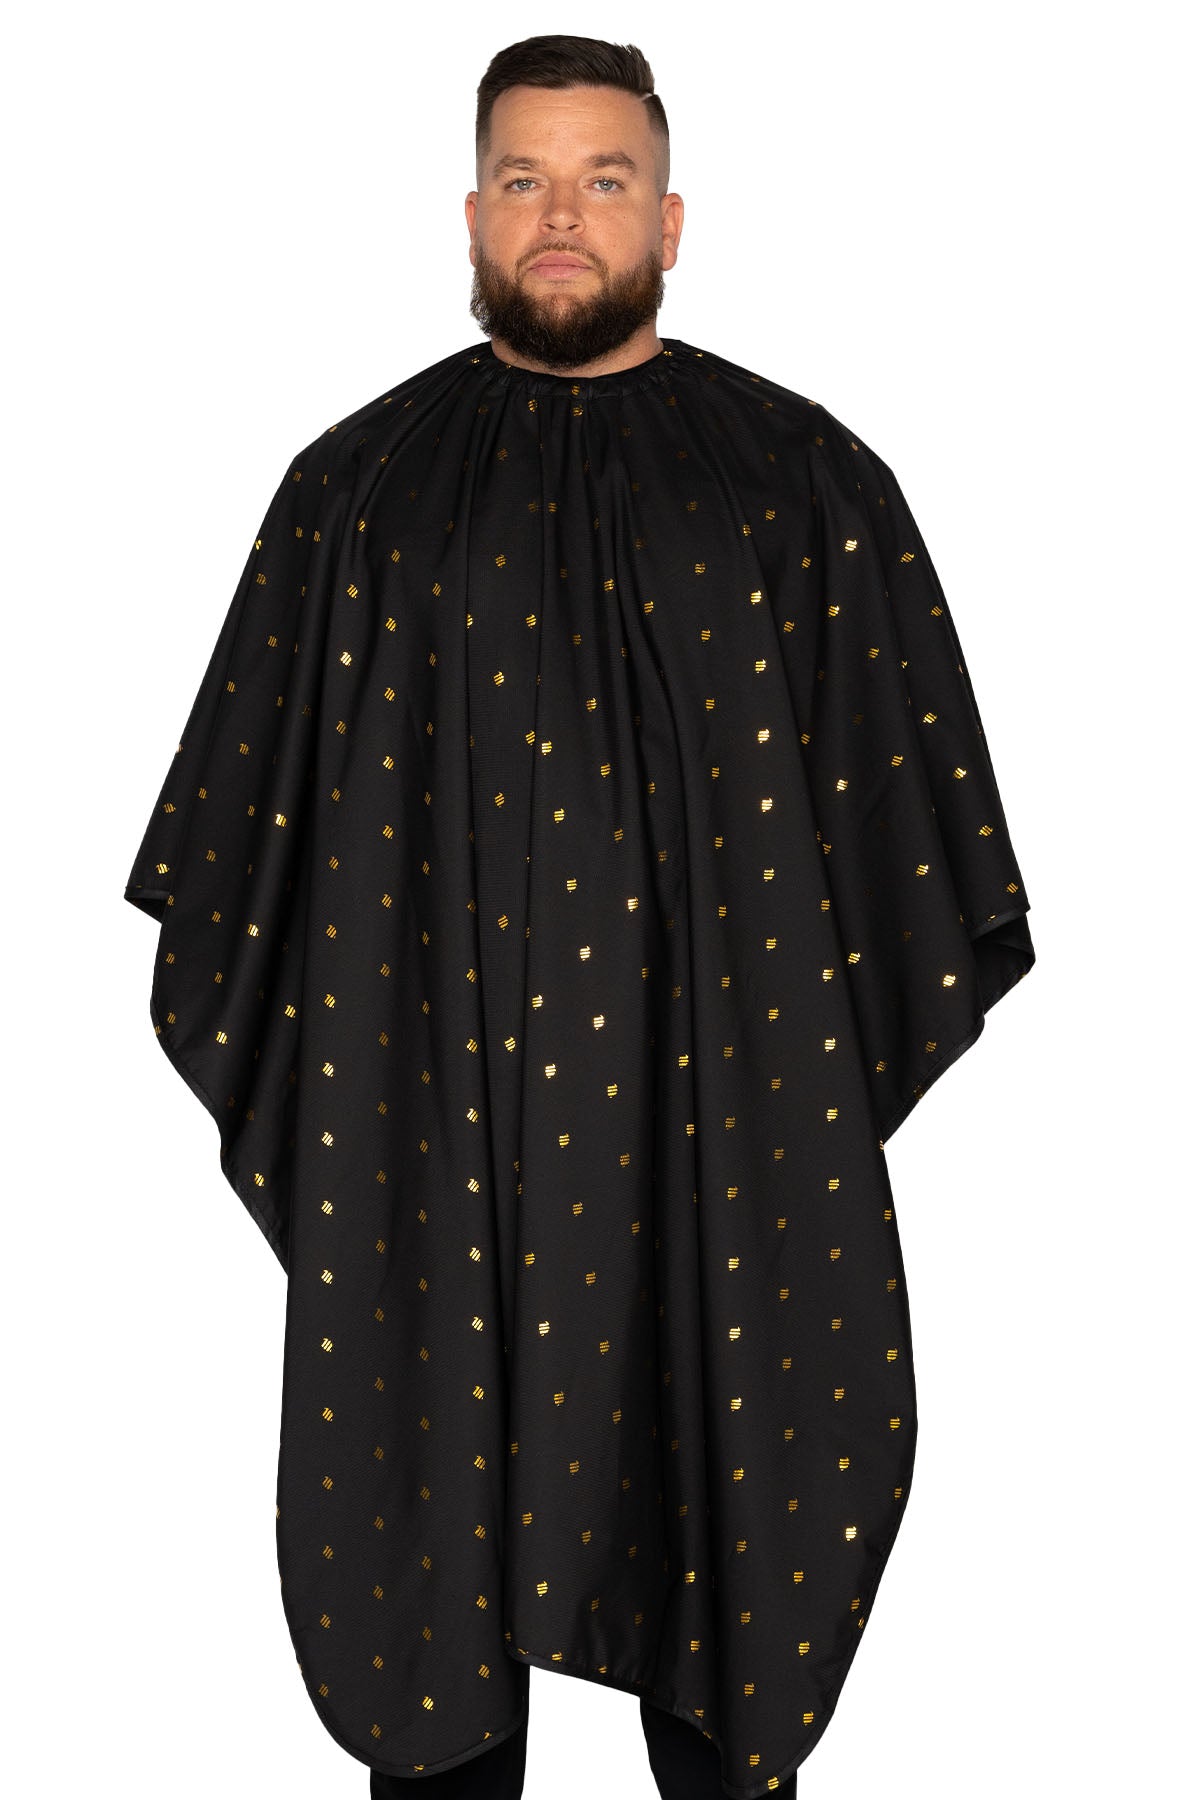 Barber Strong The Barber Capes - 24K Gold [COLLECTION]